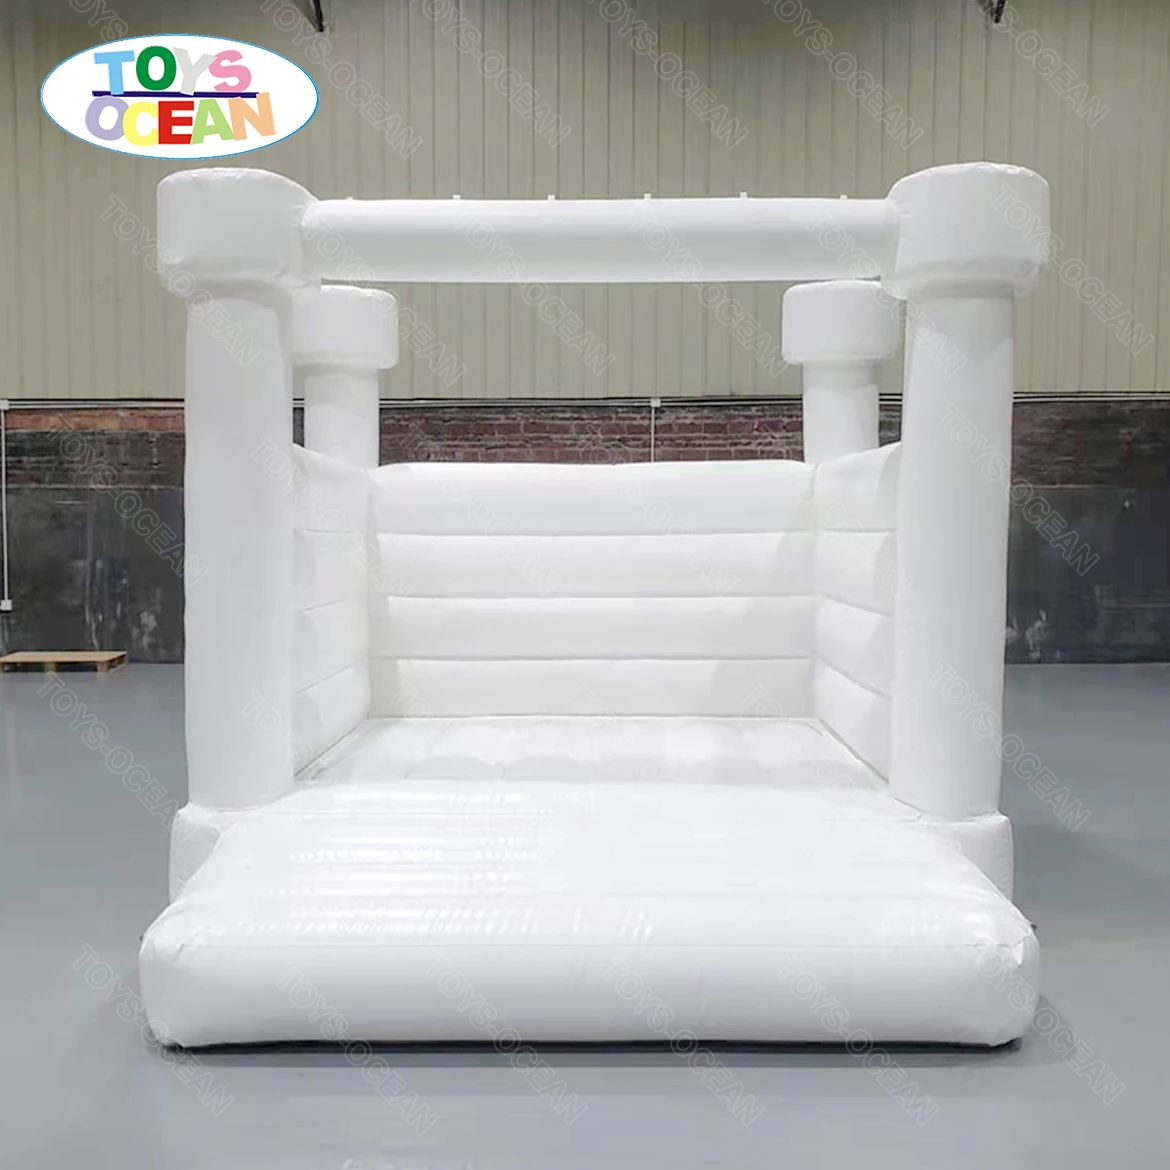 

hot sale 10X10ft white bounce house kids bouncy castle jumper inflatable Wedding bounce